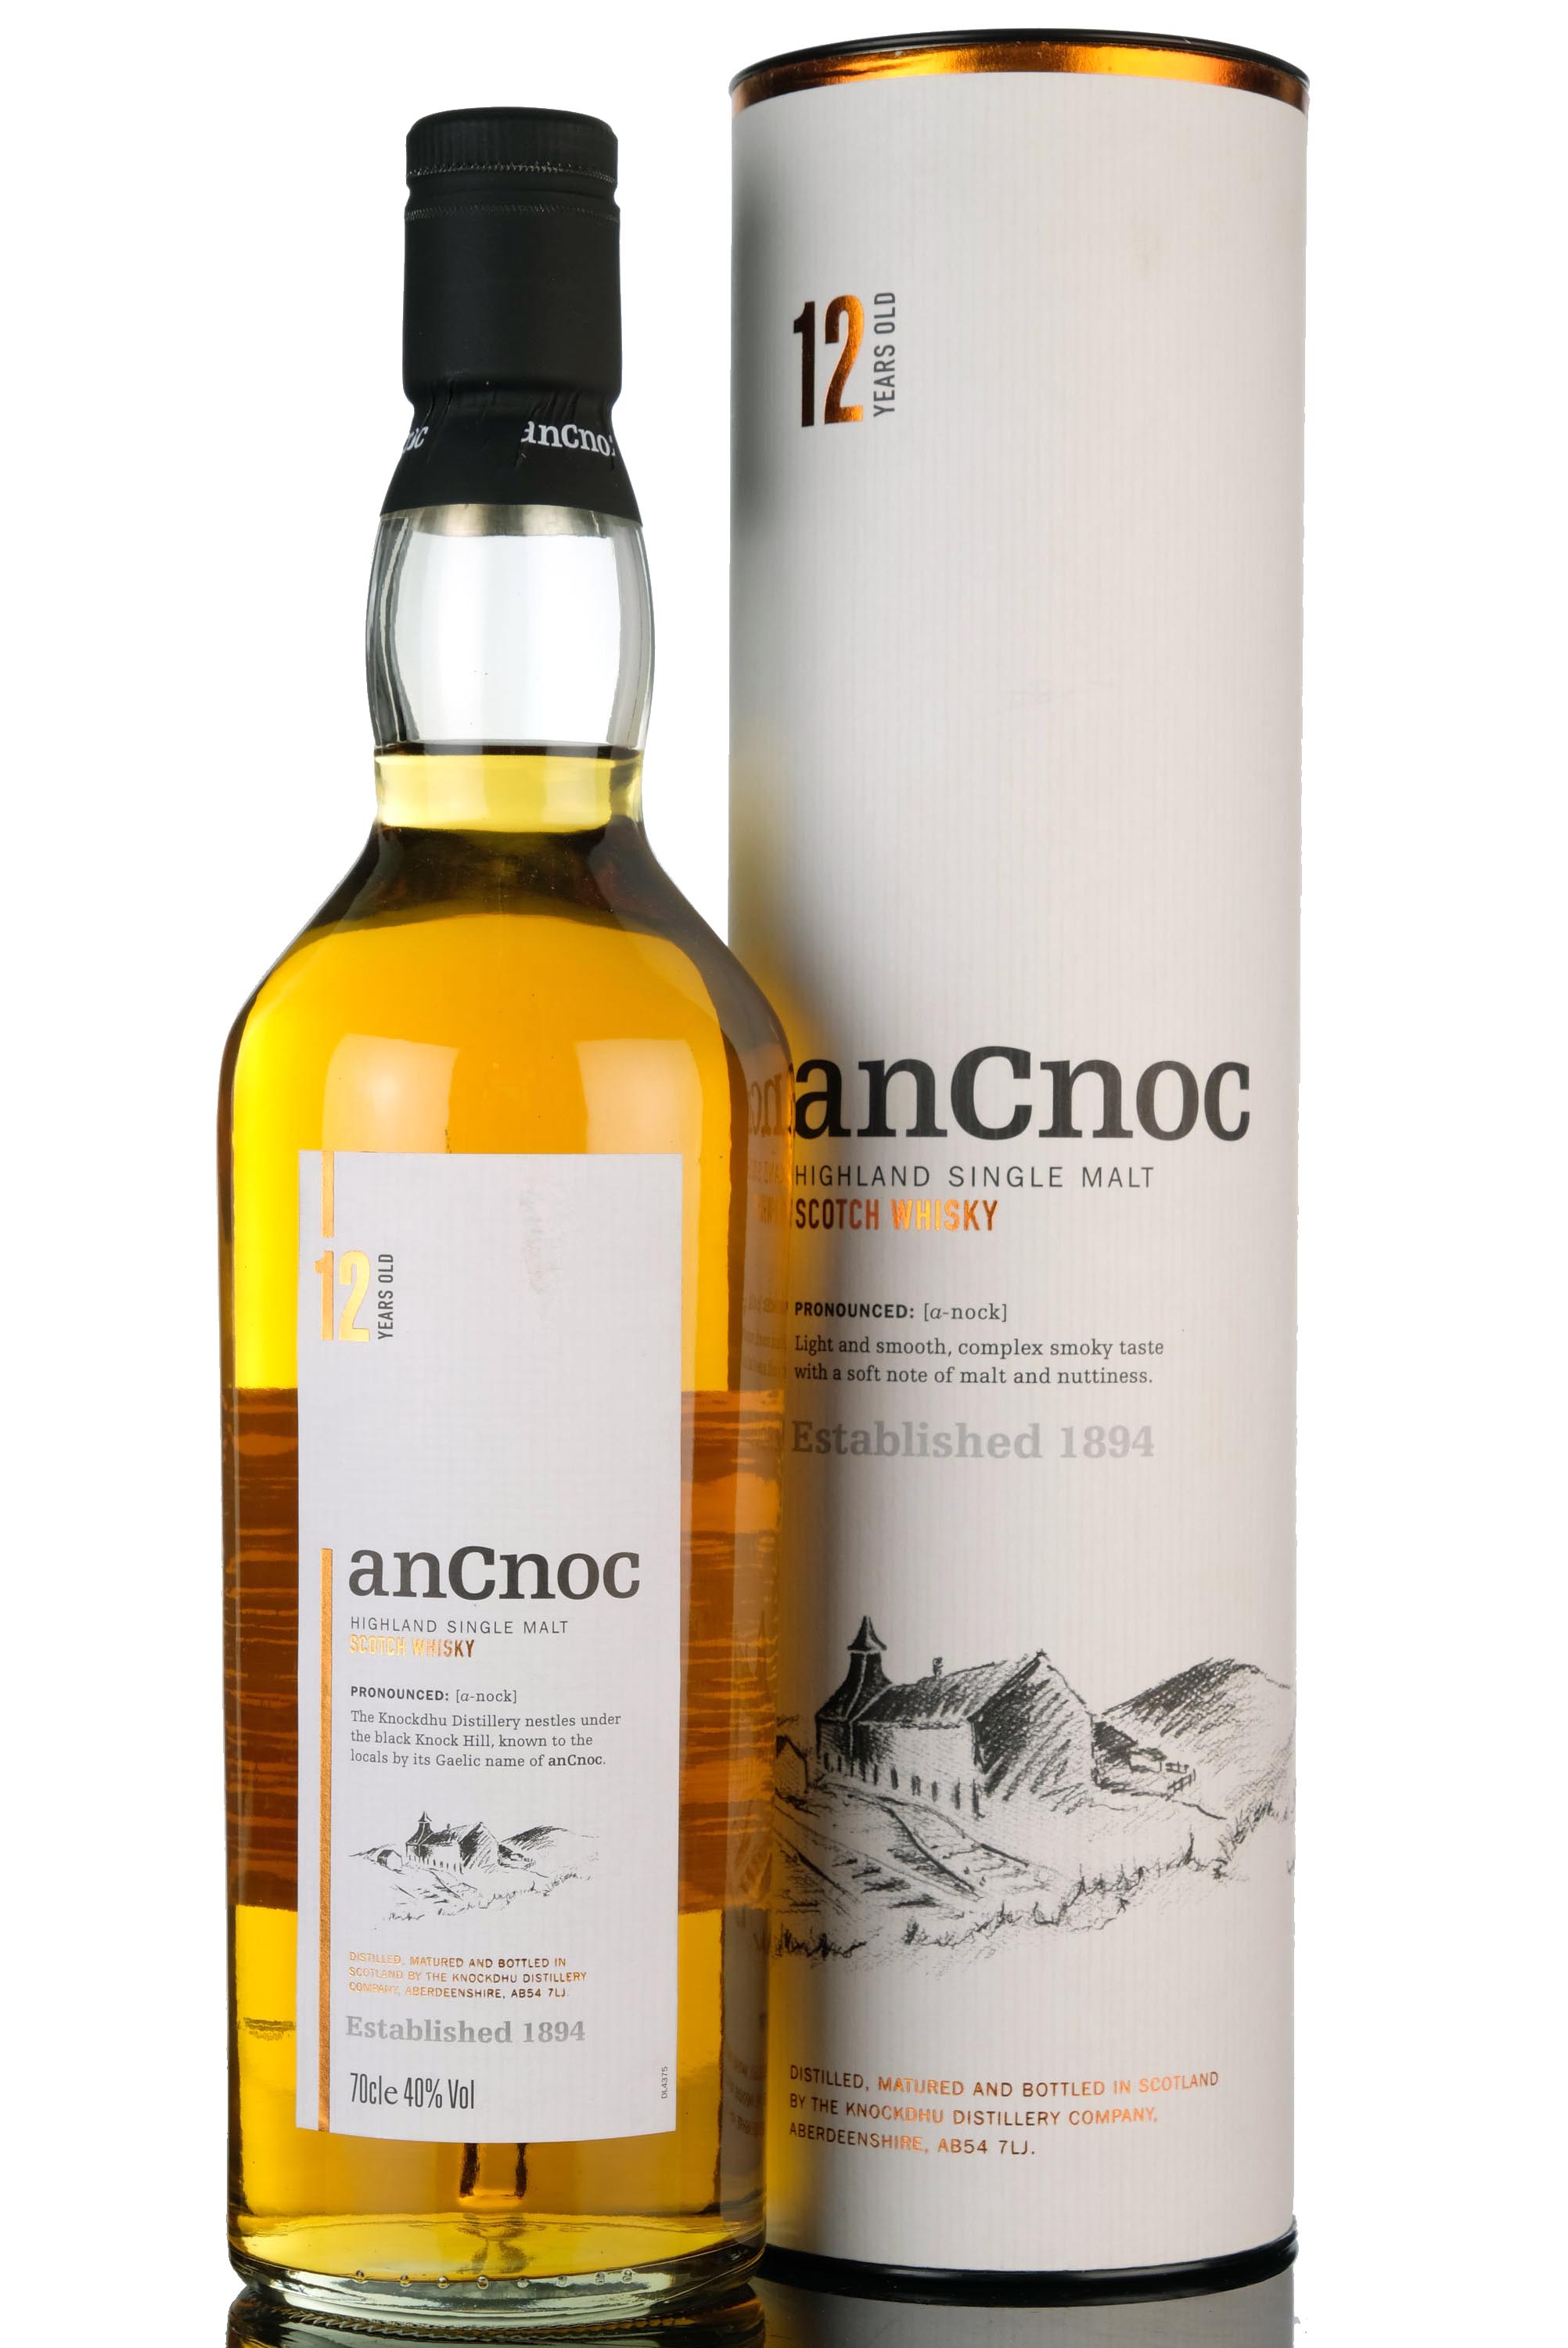 An Cnoc 12 Year Old